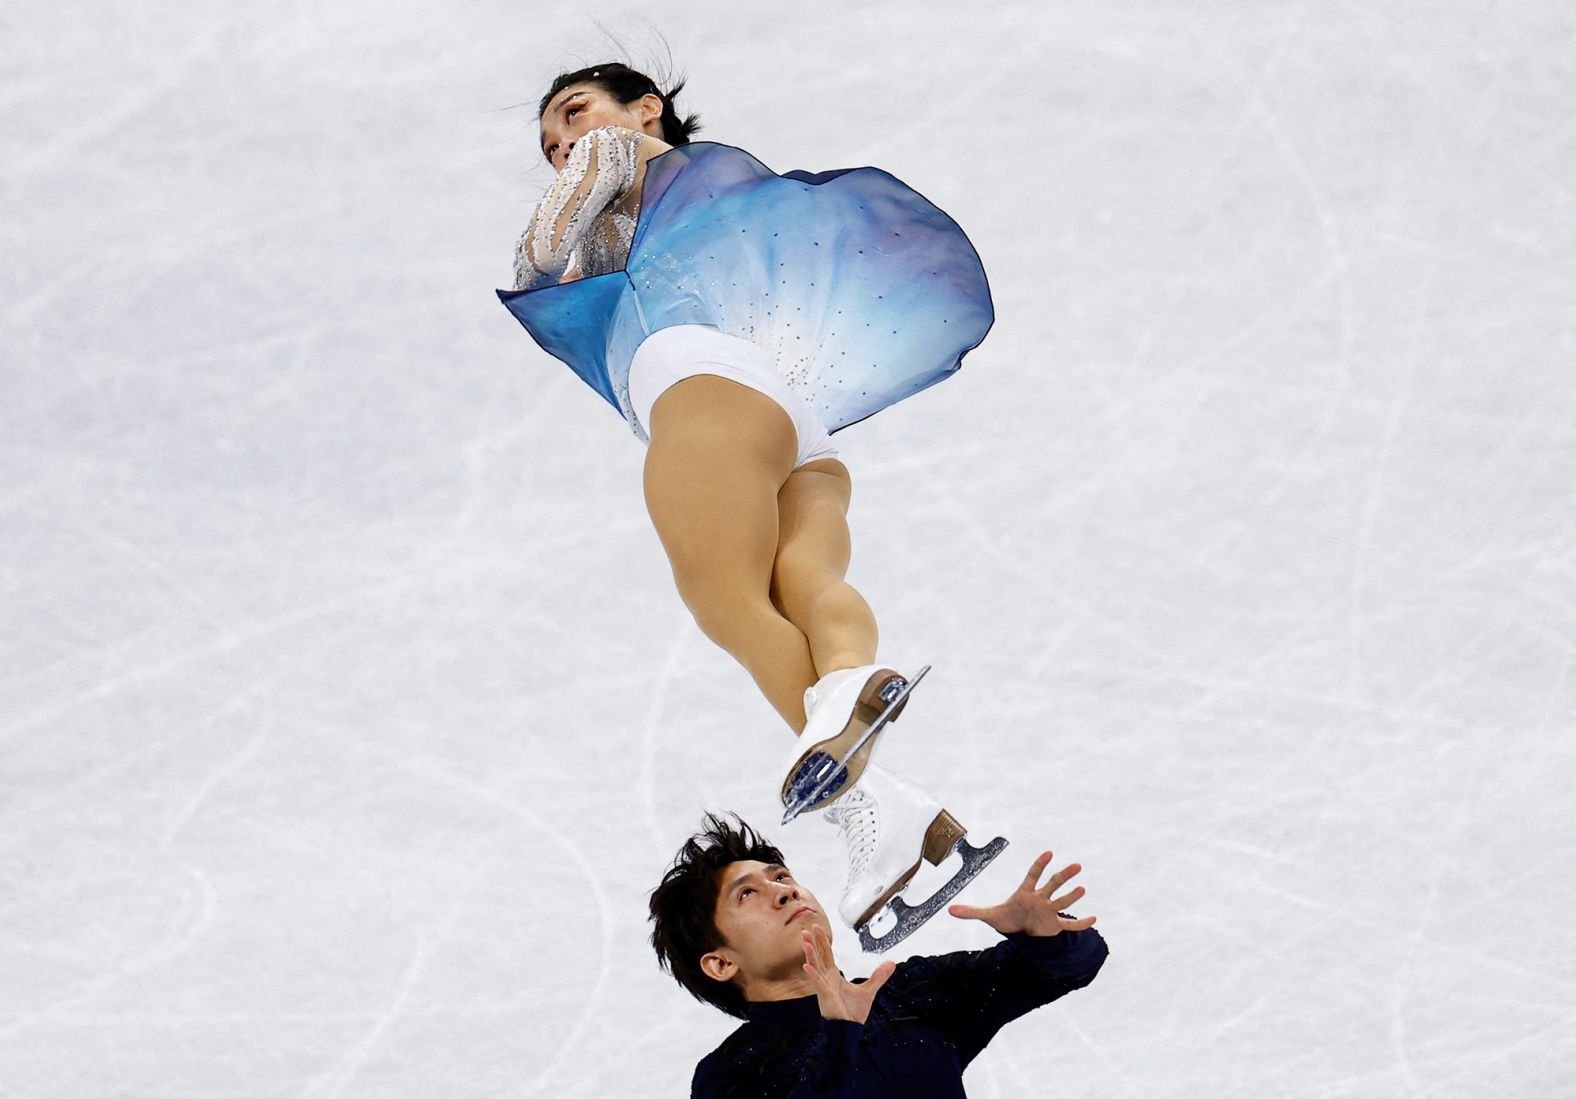 Chinese figure skaters Han Cong and Sui Wenjing compete in the pairs event on Saturday, February 19. They <a href="index.php?page=&url=https%3A%2F%2Fwww.cnn.com%2F2022%2F02%2F19%2Fsport%2Fchina-gold-pairs-skating-sui-wenjing-han-cong-intl-spt%2Findex.html" target="_blank">finished with a world-record score</a> to capture their first-ever Olympic gold.